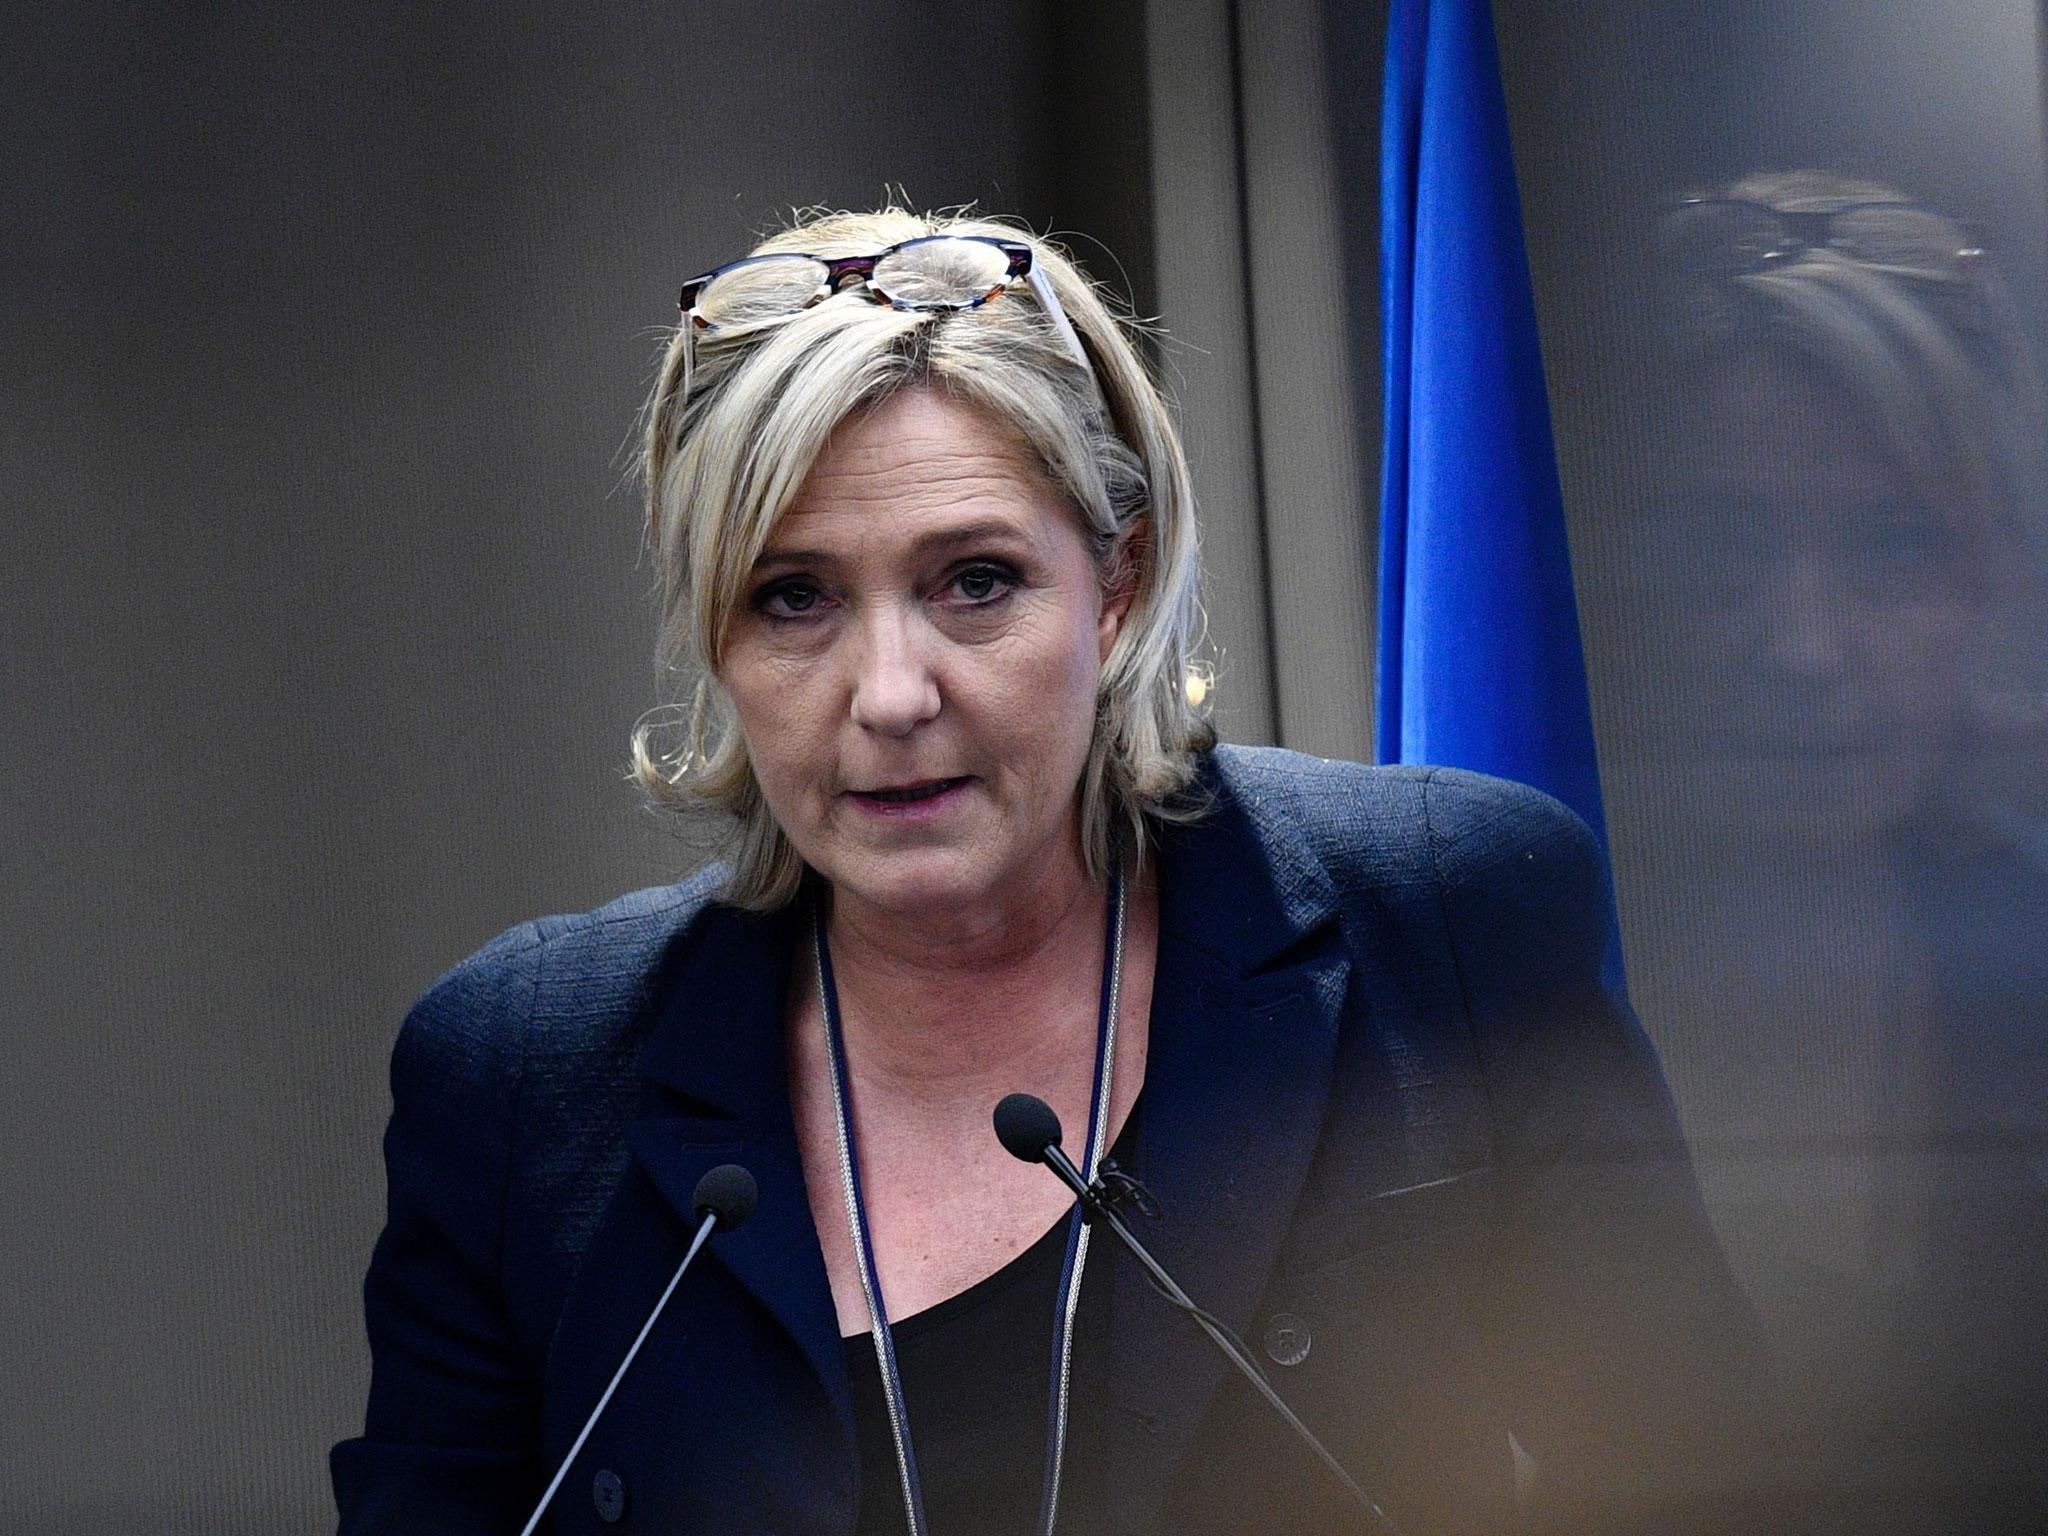 French far-right Front National (FN) party president, member of European Parliament and candidate for France's 2017 presidential election, Marine Le Pen delivers a speech during a meeting about healthcare, on December 9, 2016